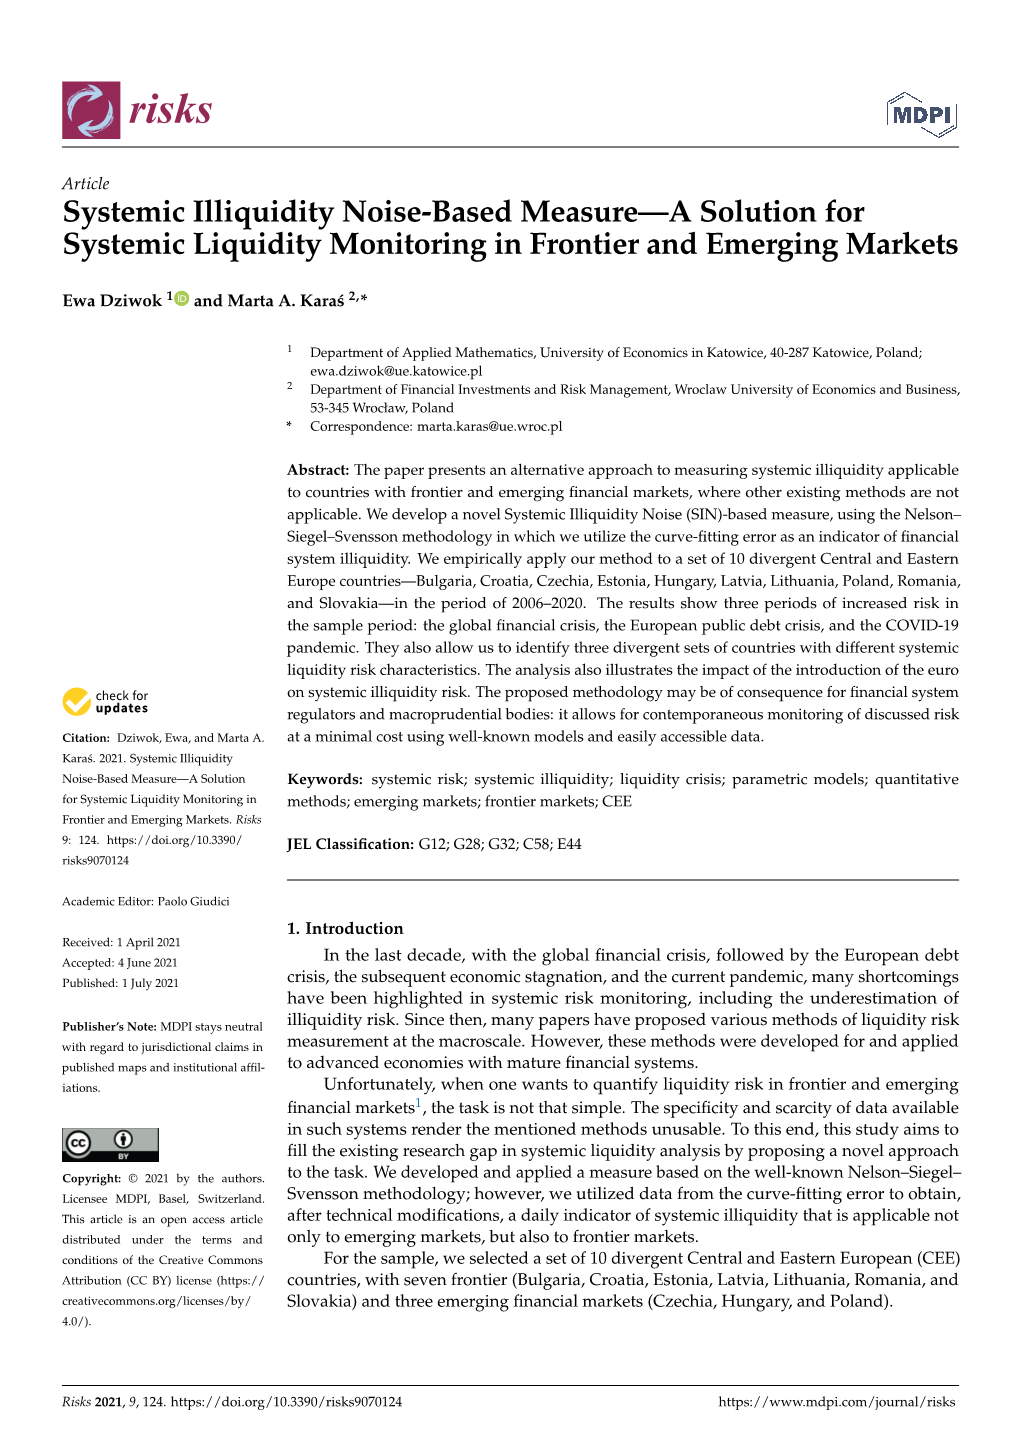 Systemic Illiquidity Noise-Based Measure—A Solution for Systemic Liquidity Monitoring in Frontier and Emerging Markets